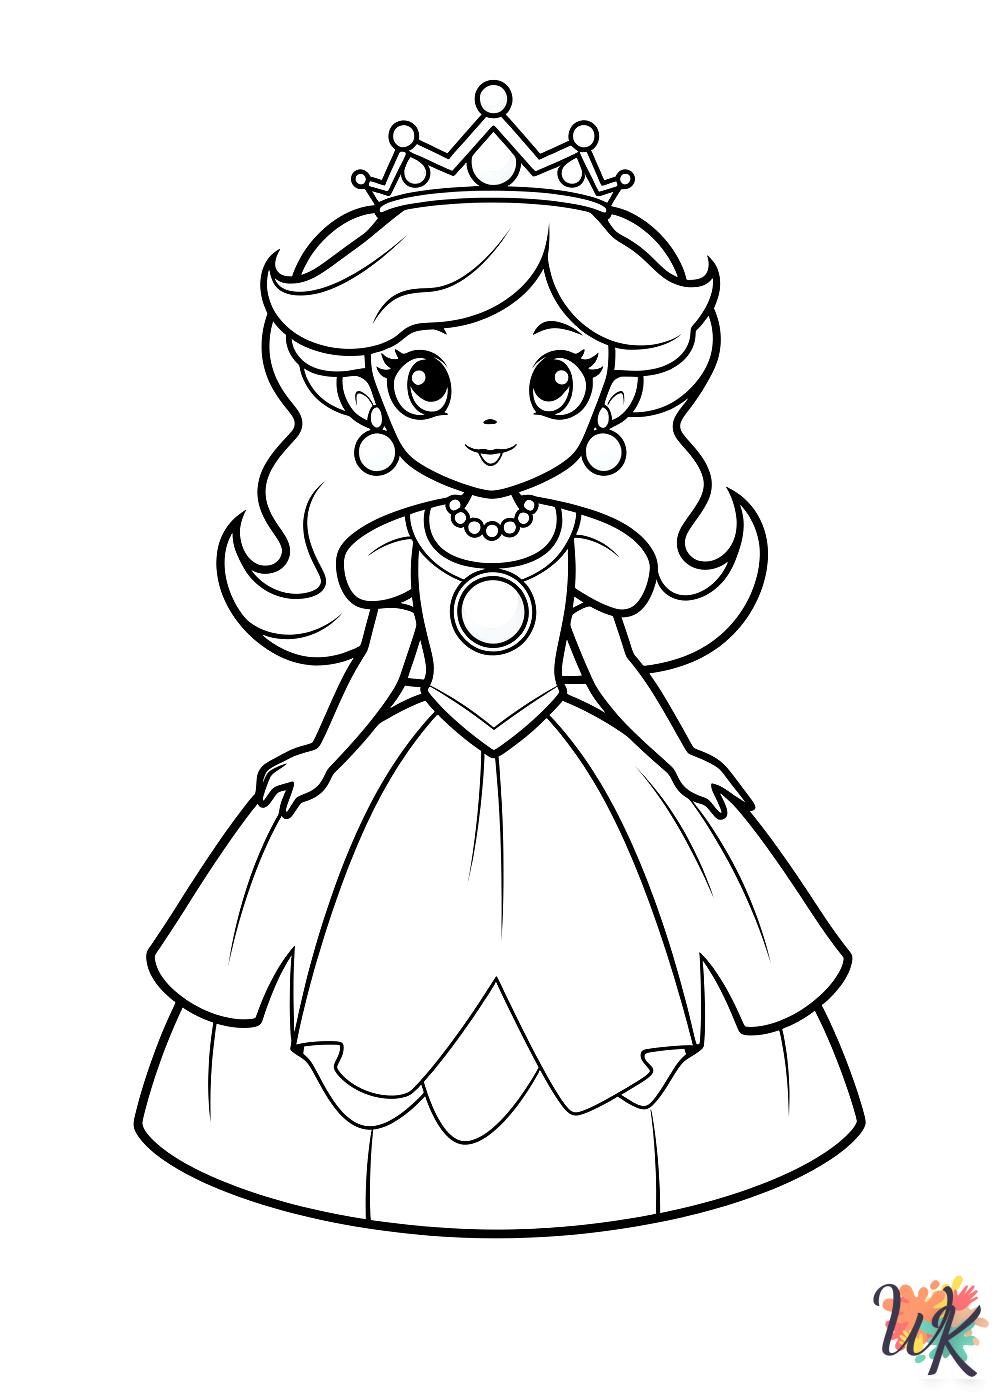 Princess Peach coloring pages printable free